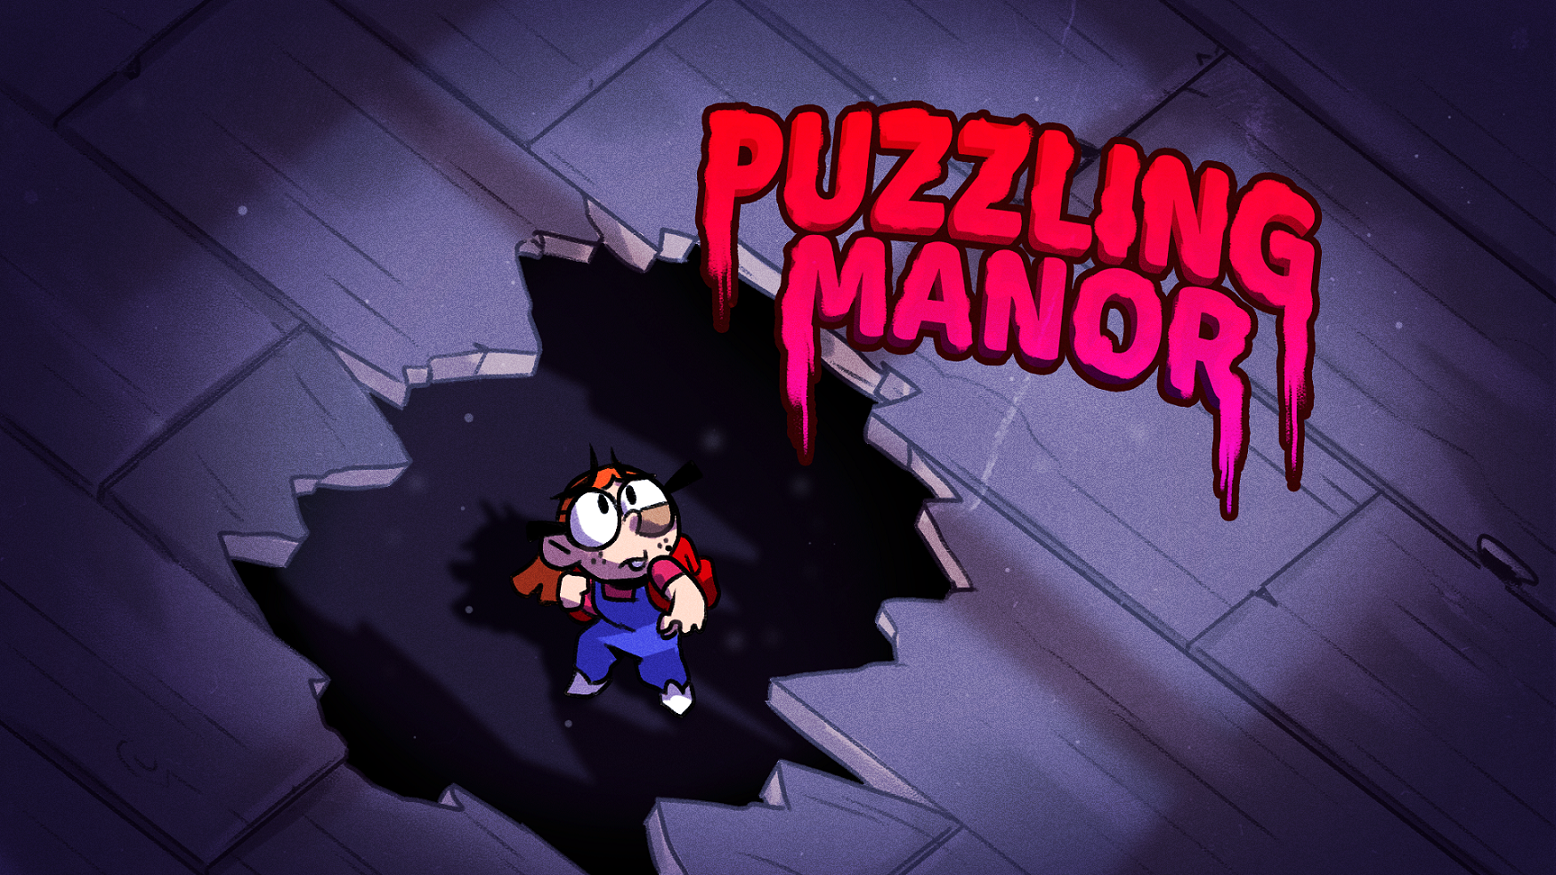 Puzzling Manor